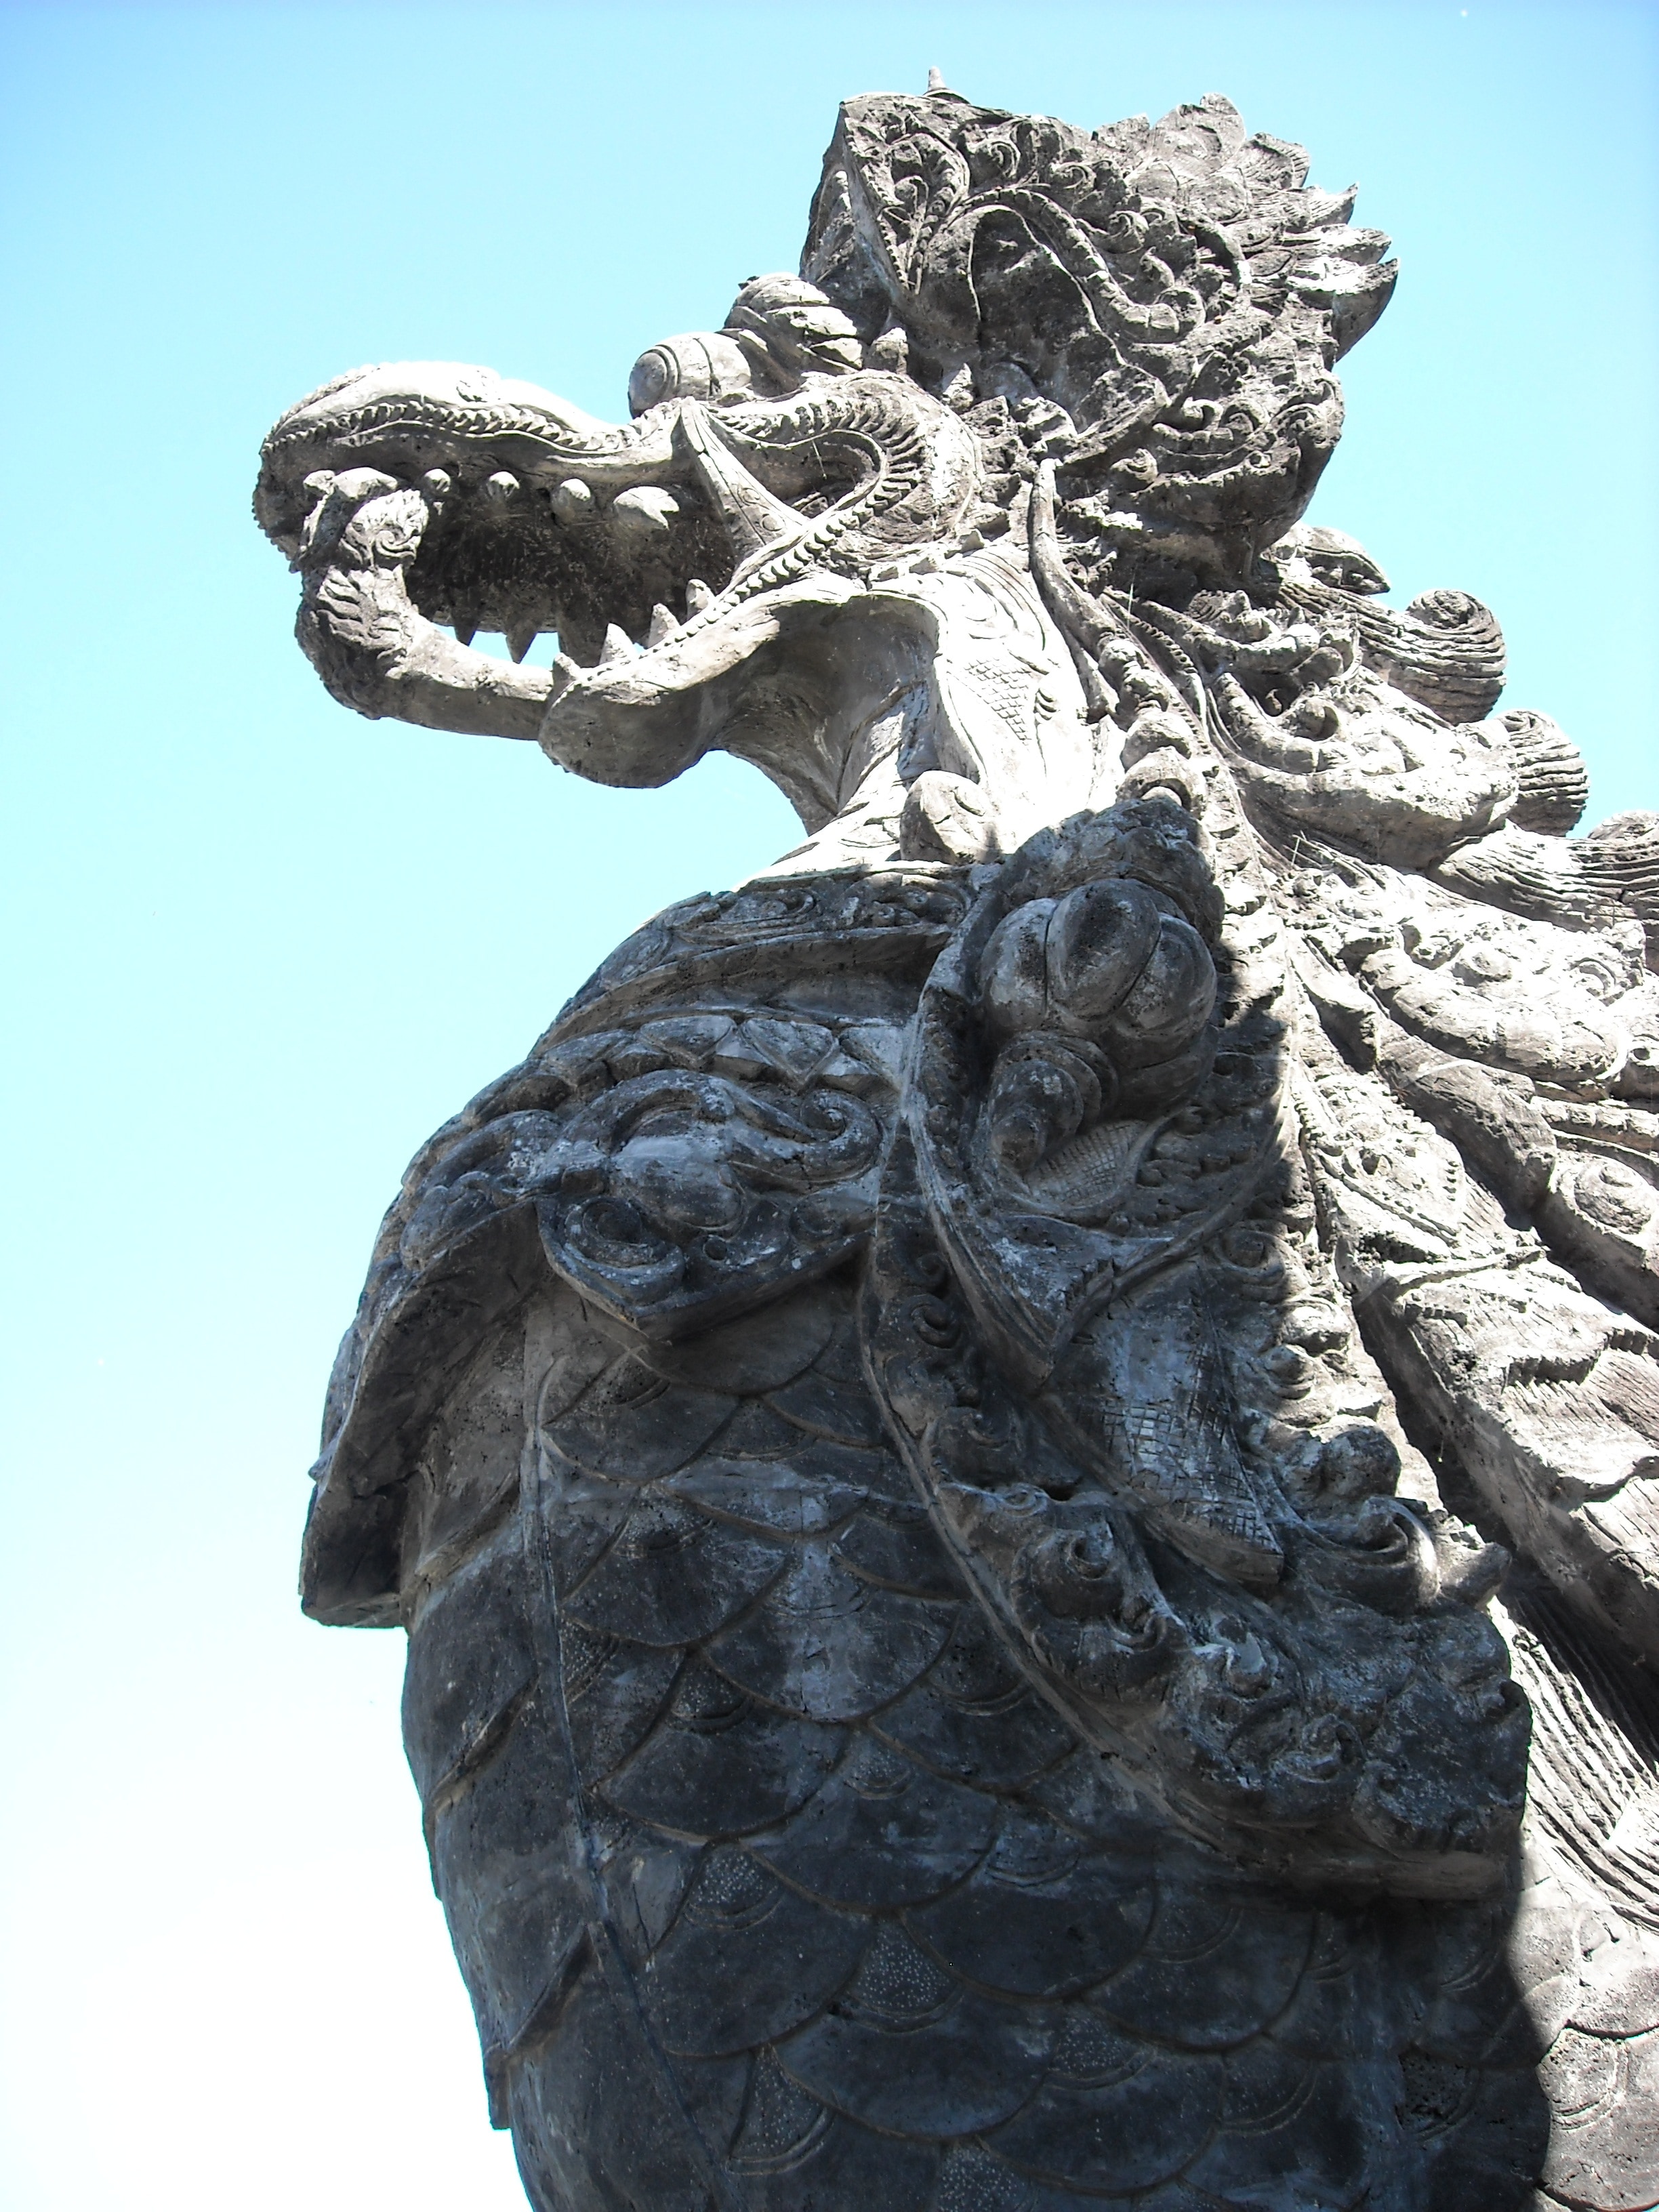 Chinese Dragon statue under clear blue sky